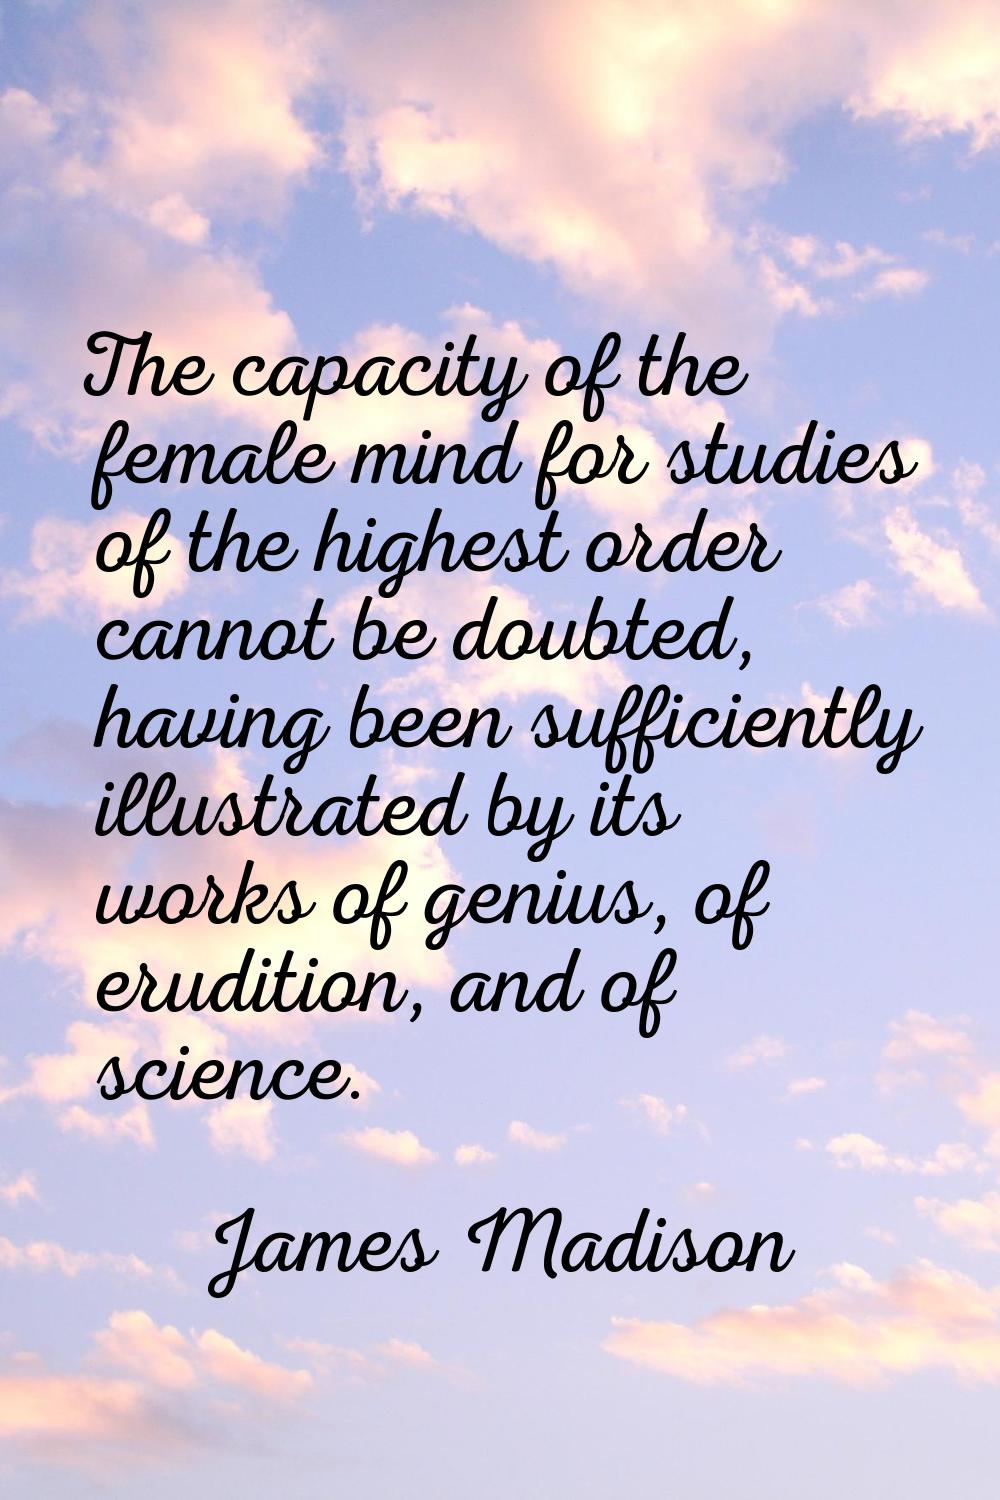 The capacity of the female mind for studies of the highest order cannot be doubted, having been suf